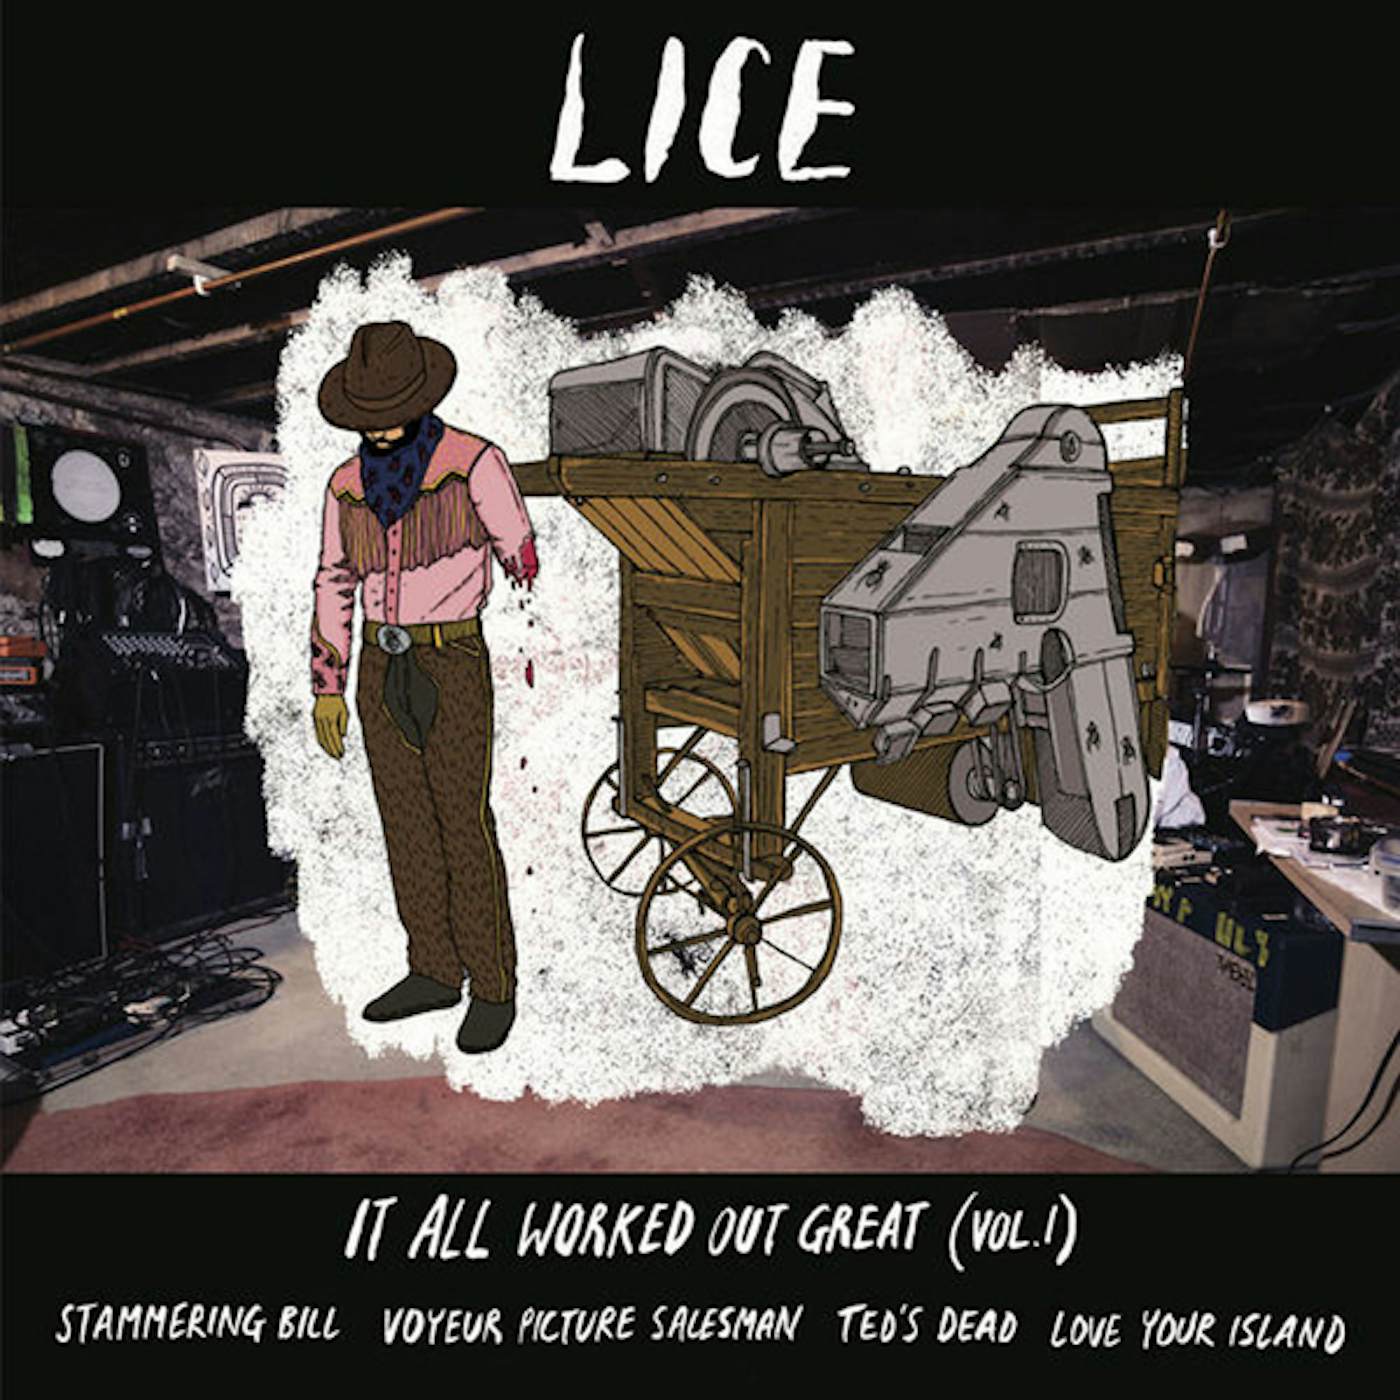 LICE IT ALL WORKED OUT GREAT 1 Vinyl Record